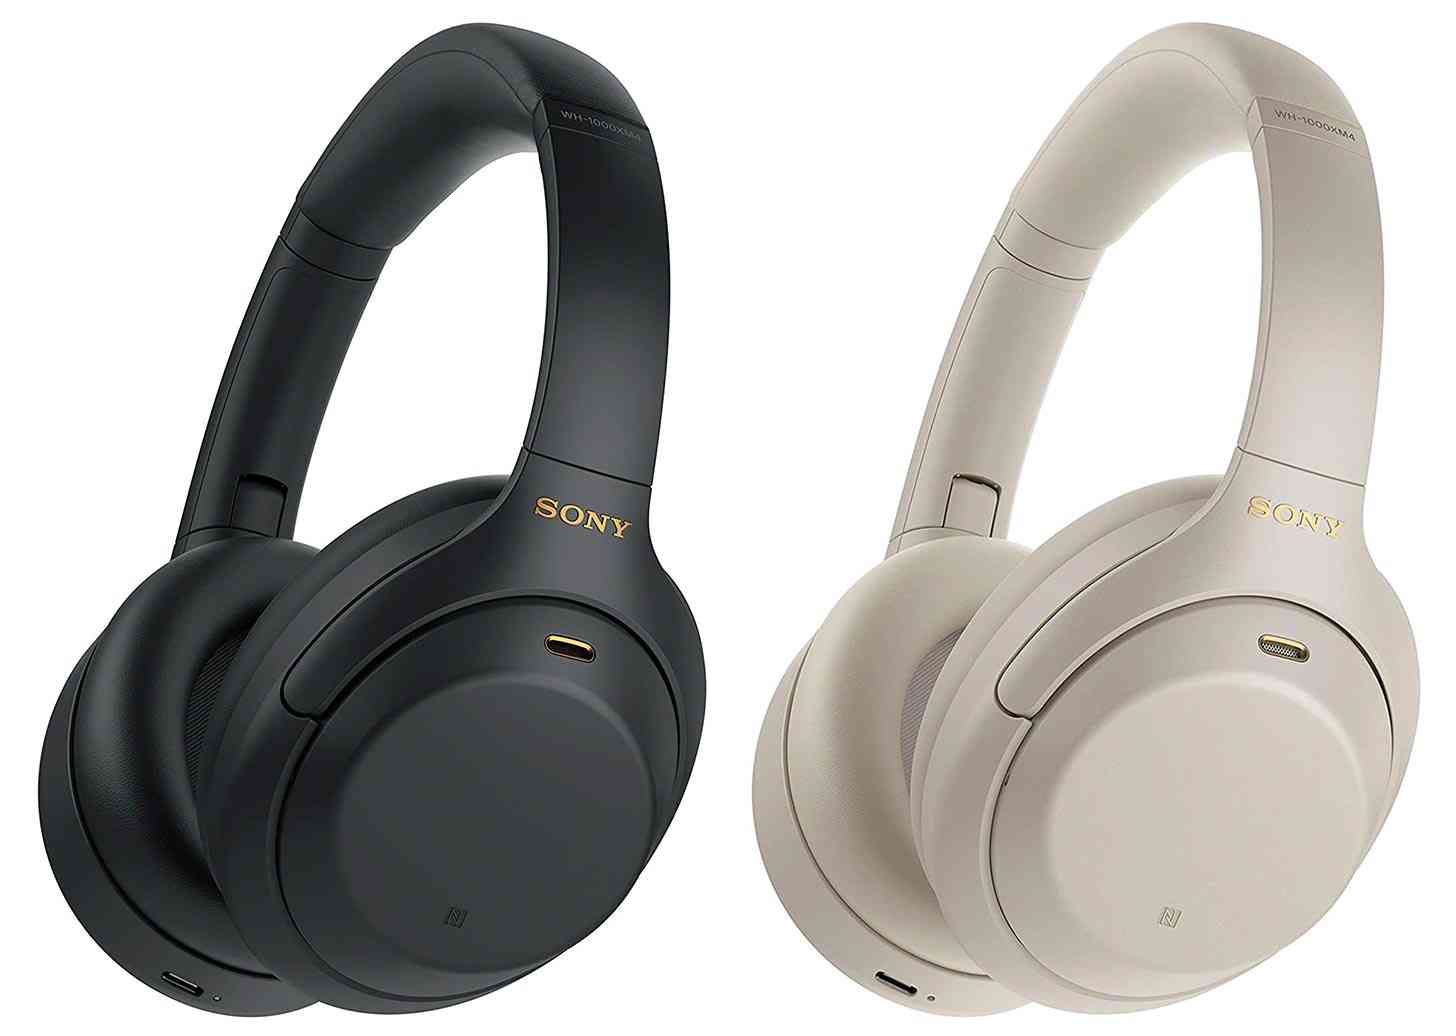 Sony WH-1000XM4 headphones official with better noise canceling